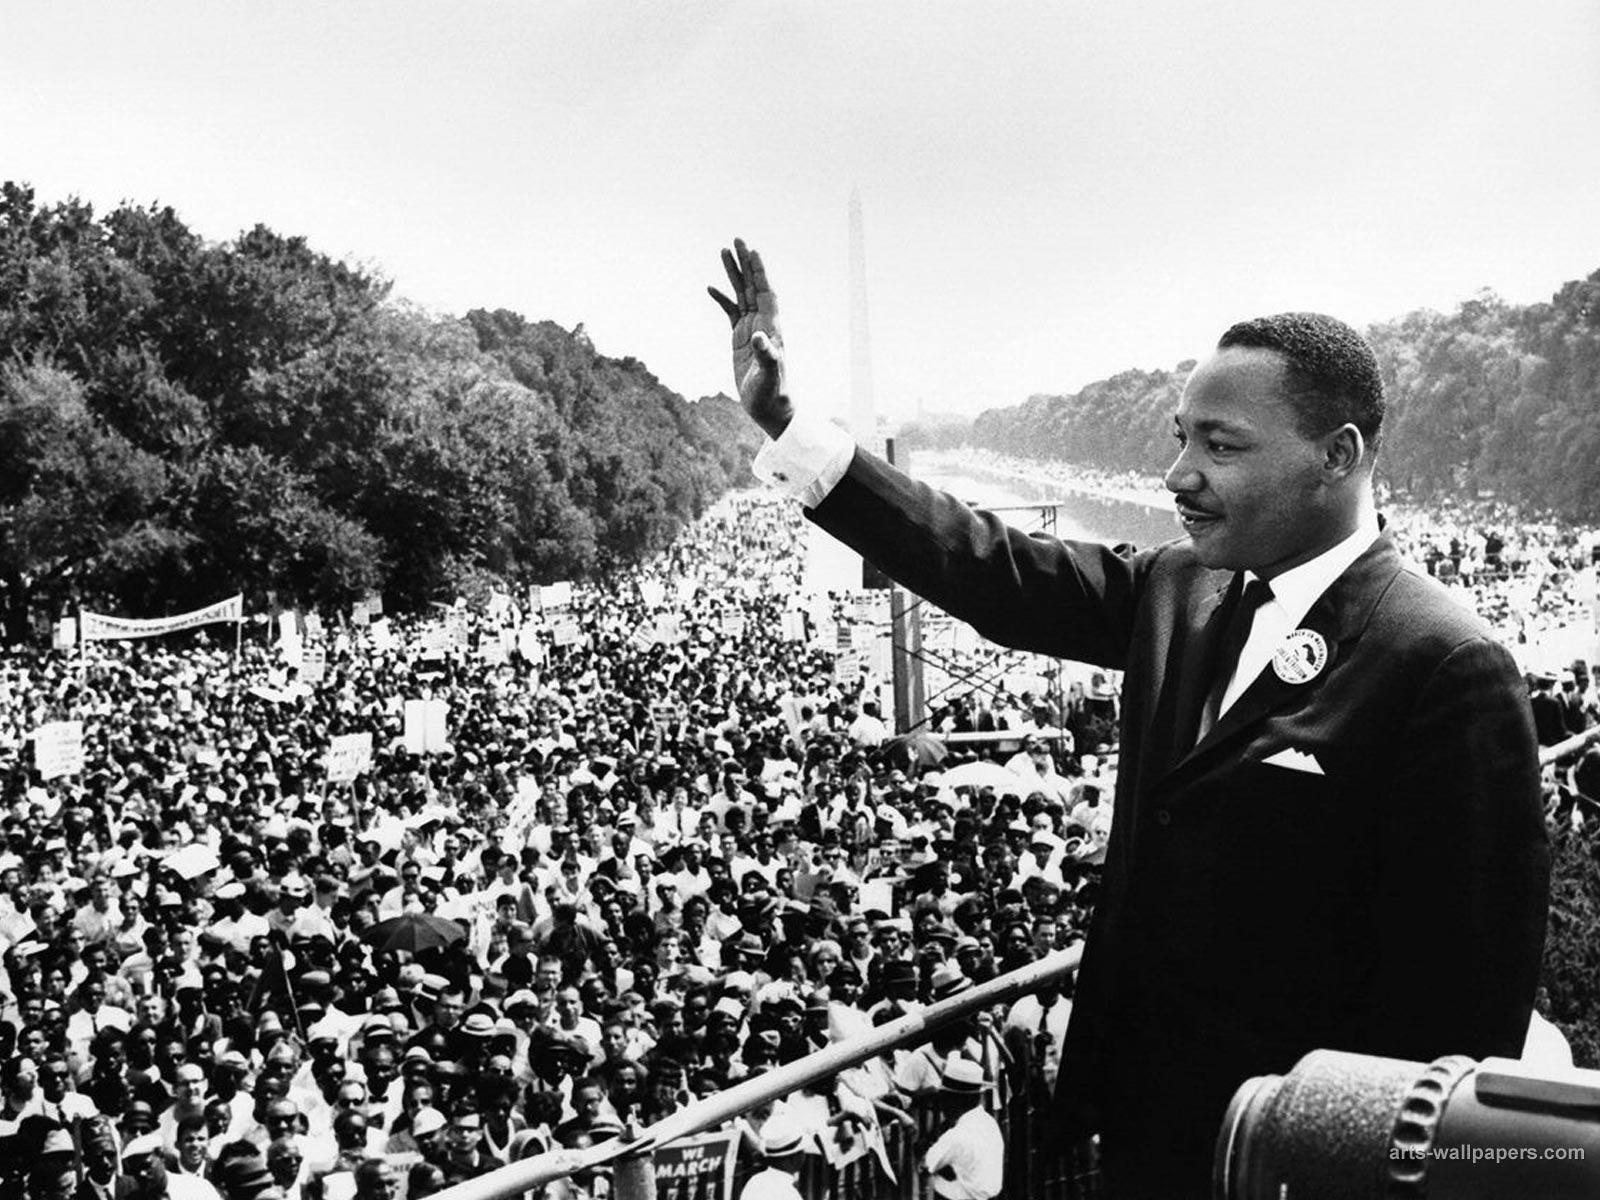 Martin Luther King Jr. waving to a crowd gathered in Washington D.C. on the National Mall